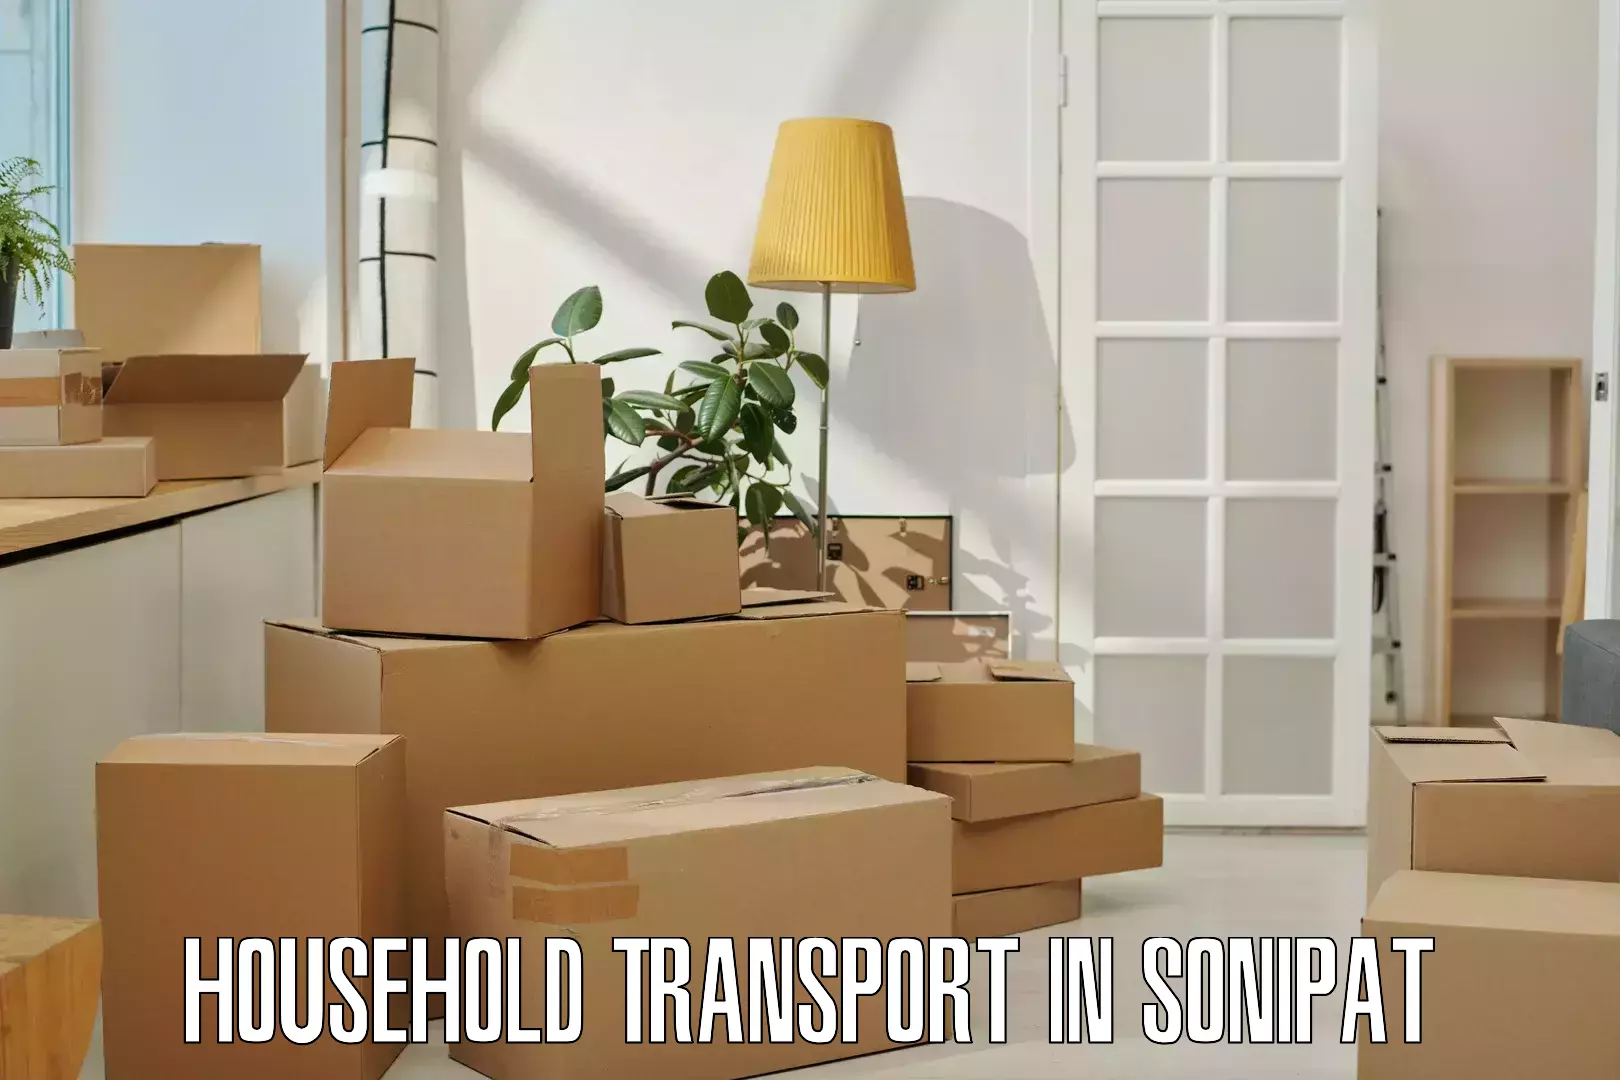 Furniture delivery service in Sonipat